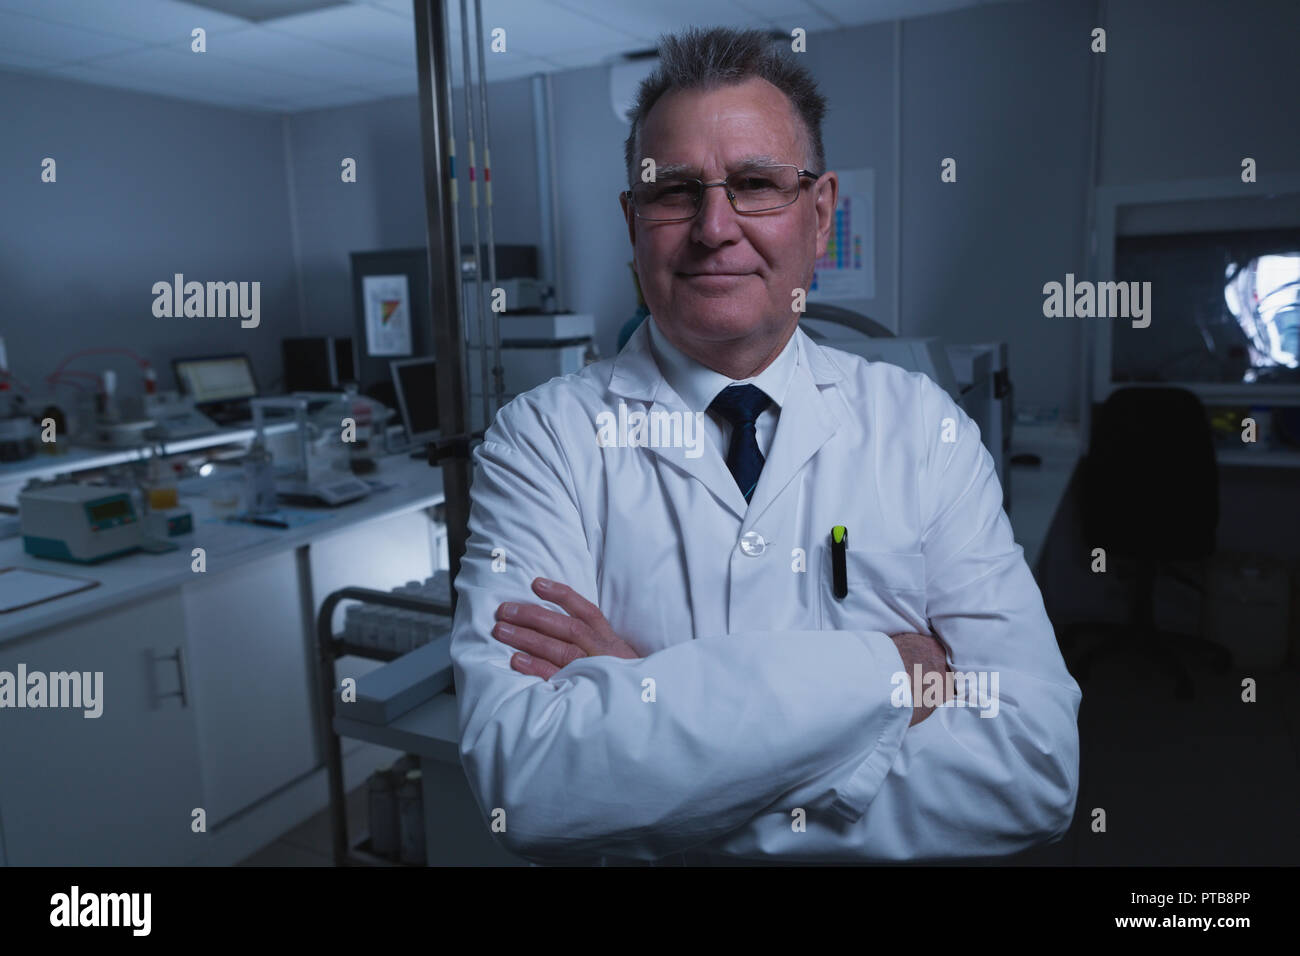 Male scientist standing with arms crossed in laboratory Stock Photo